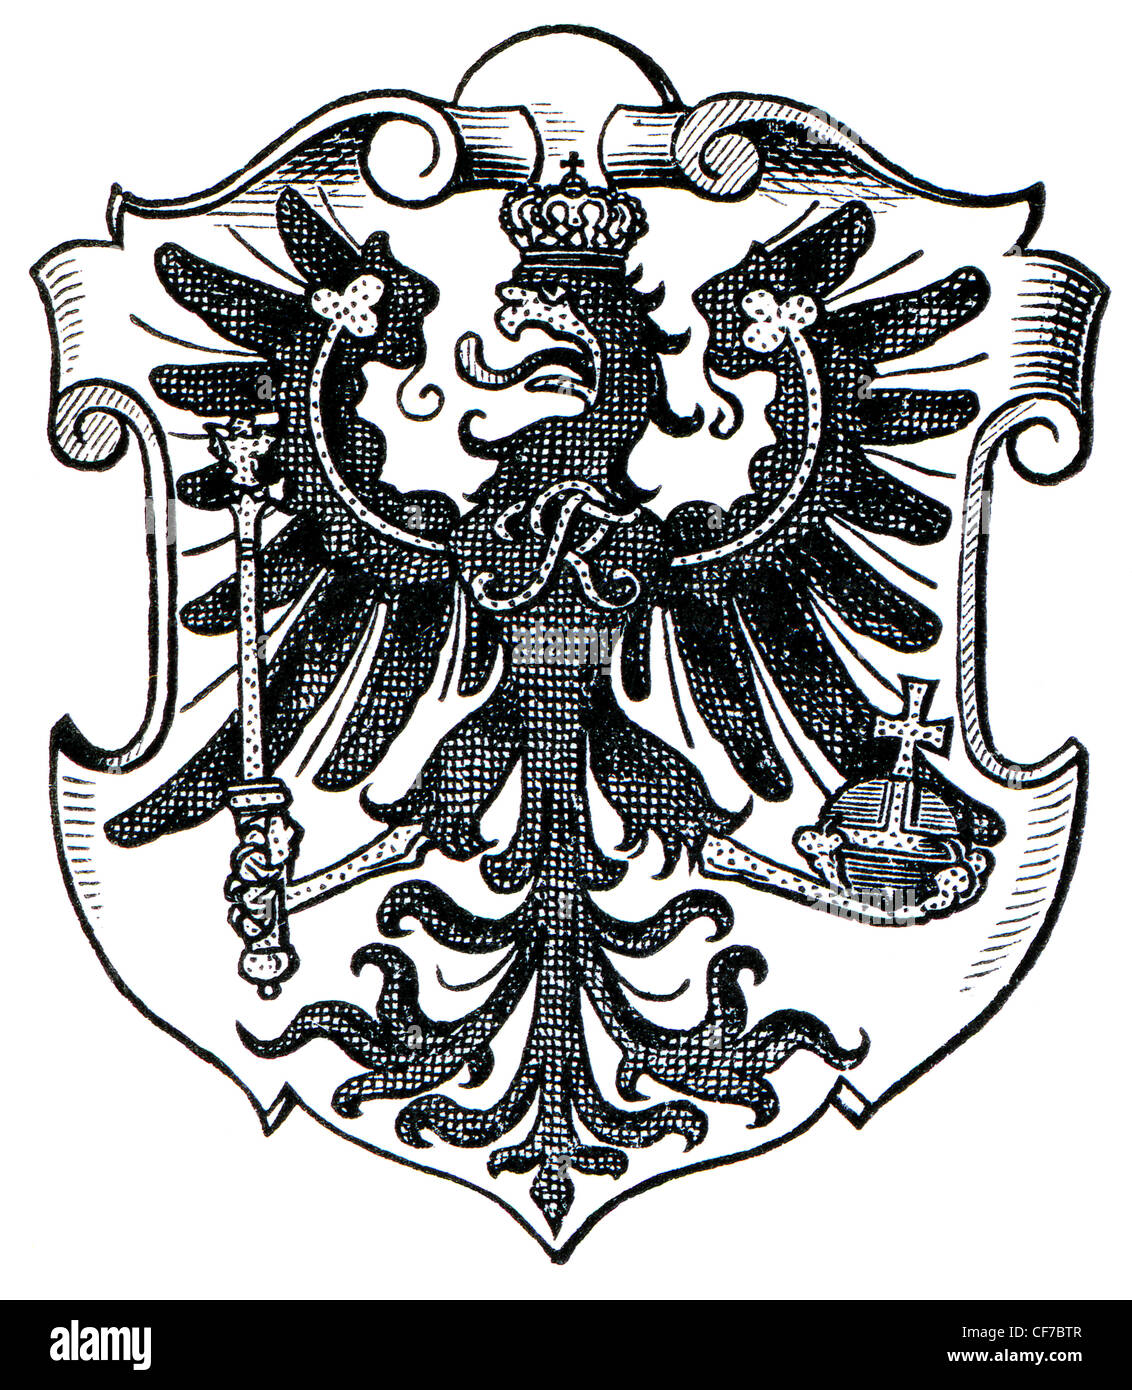 Coat of Arms East Prussia Stock Photo